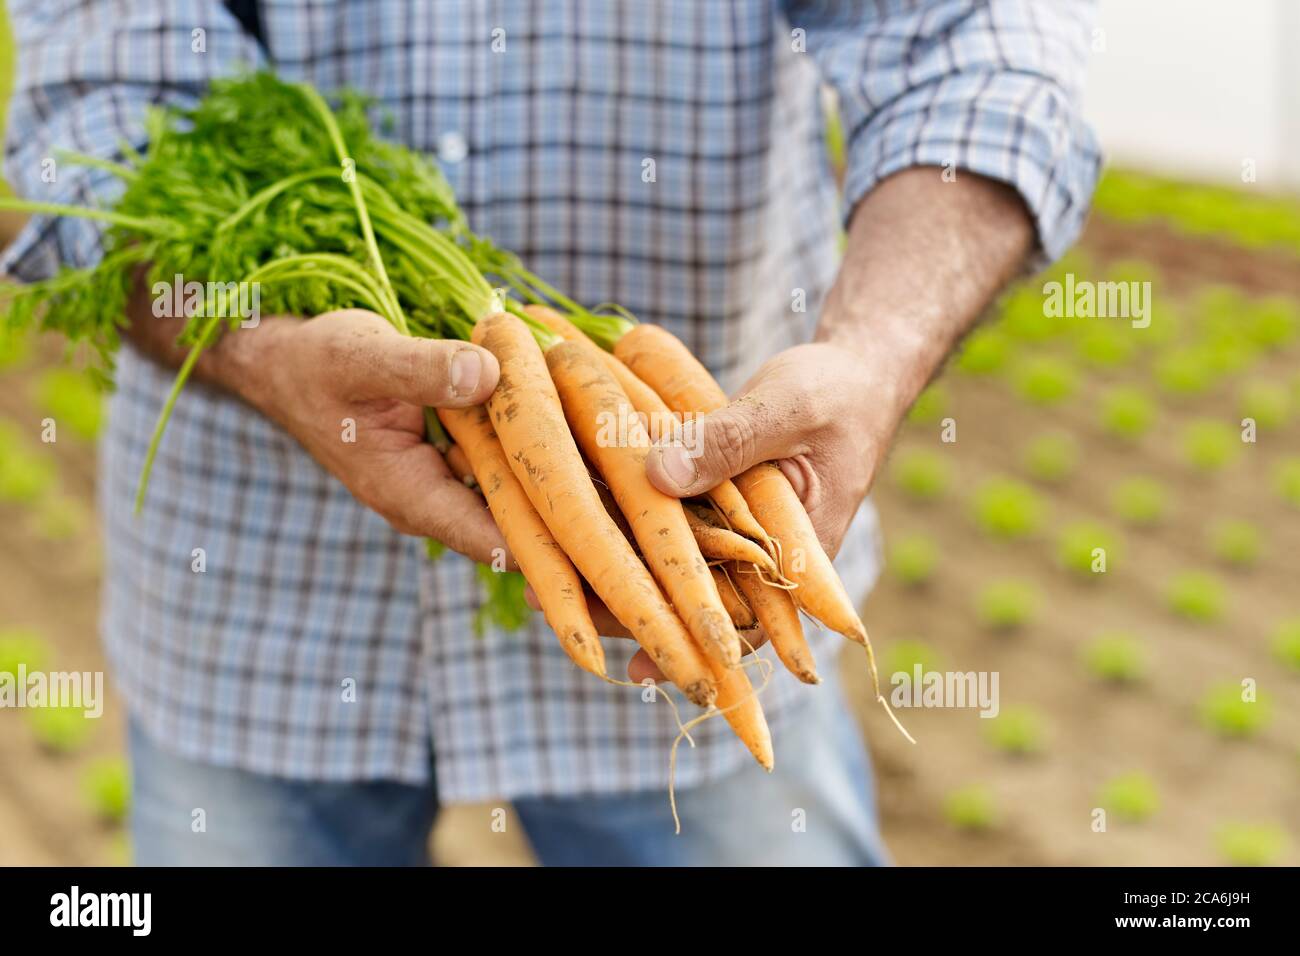 Farmer Showing Carrots And Vegetables To Camera In Greenhouse Stock Photo